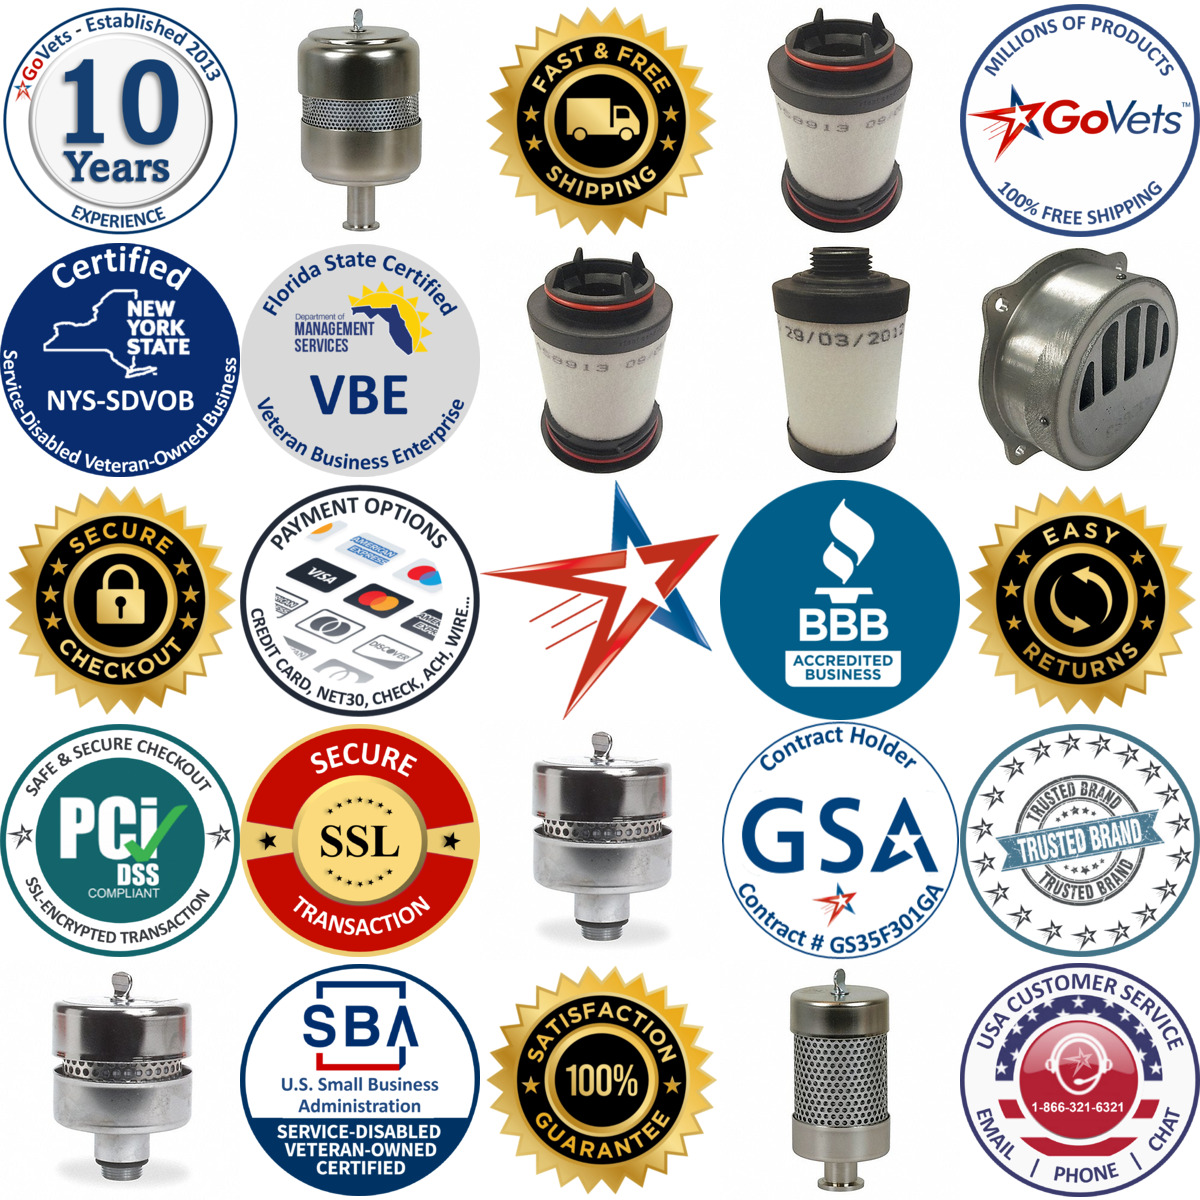 A selection of Blower and Vacuum Pump Filters products on GoVets